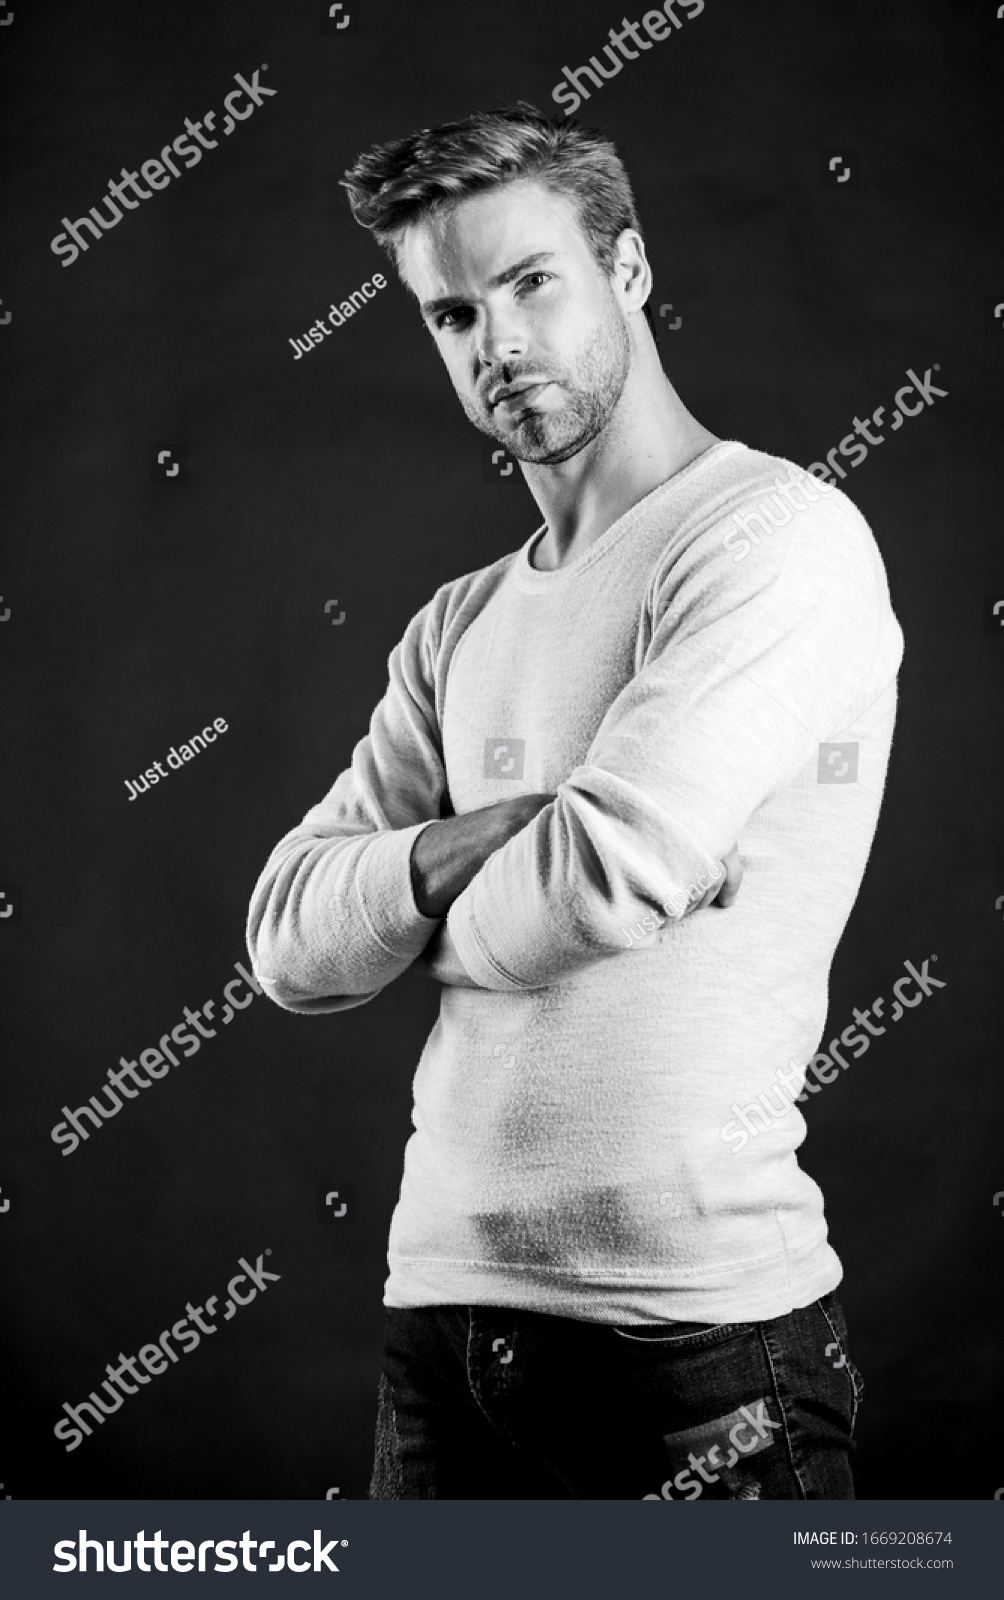 Rugged Manly Handsome Man Confidence Charisma Stock Photo 1669208674 ...